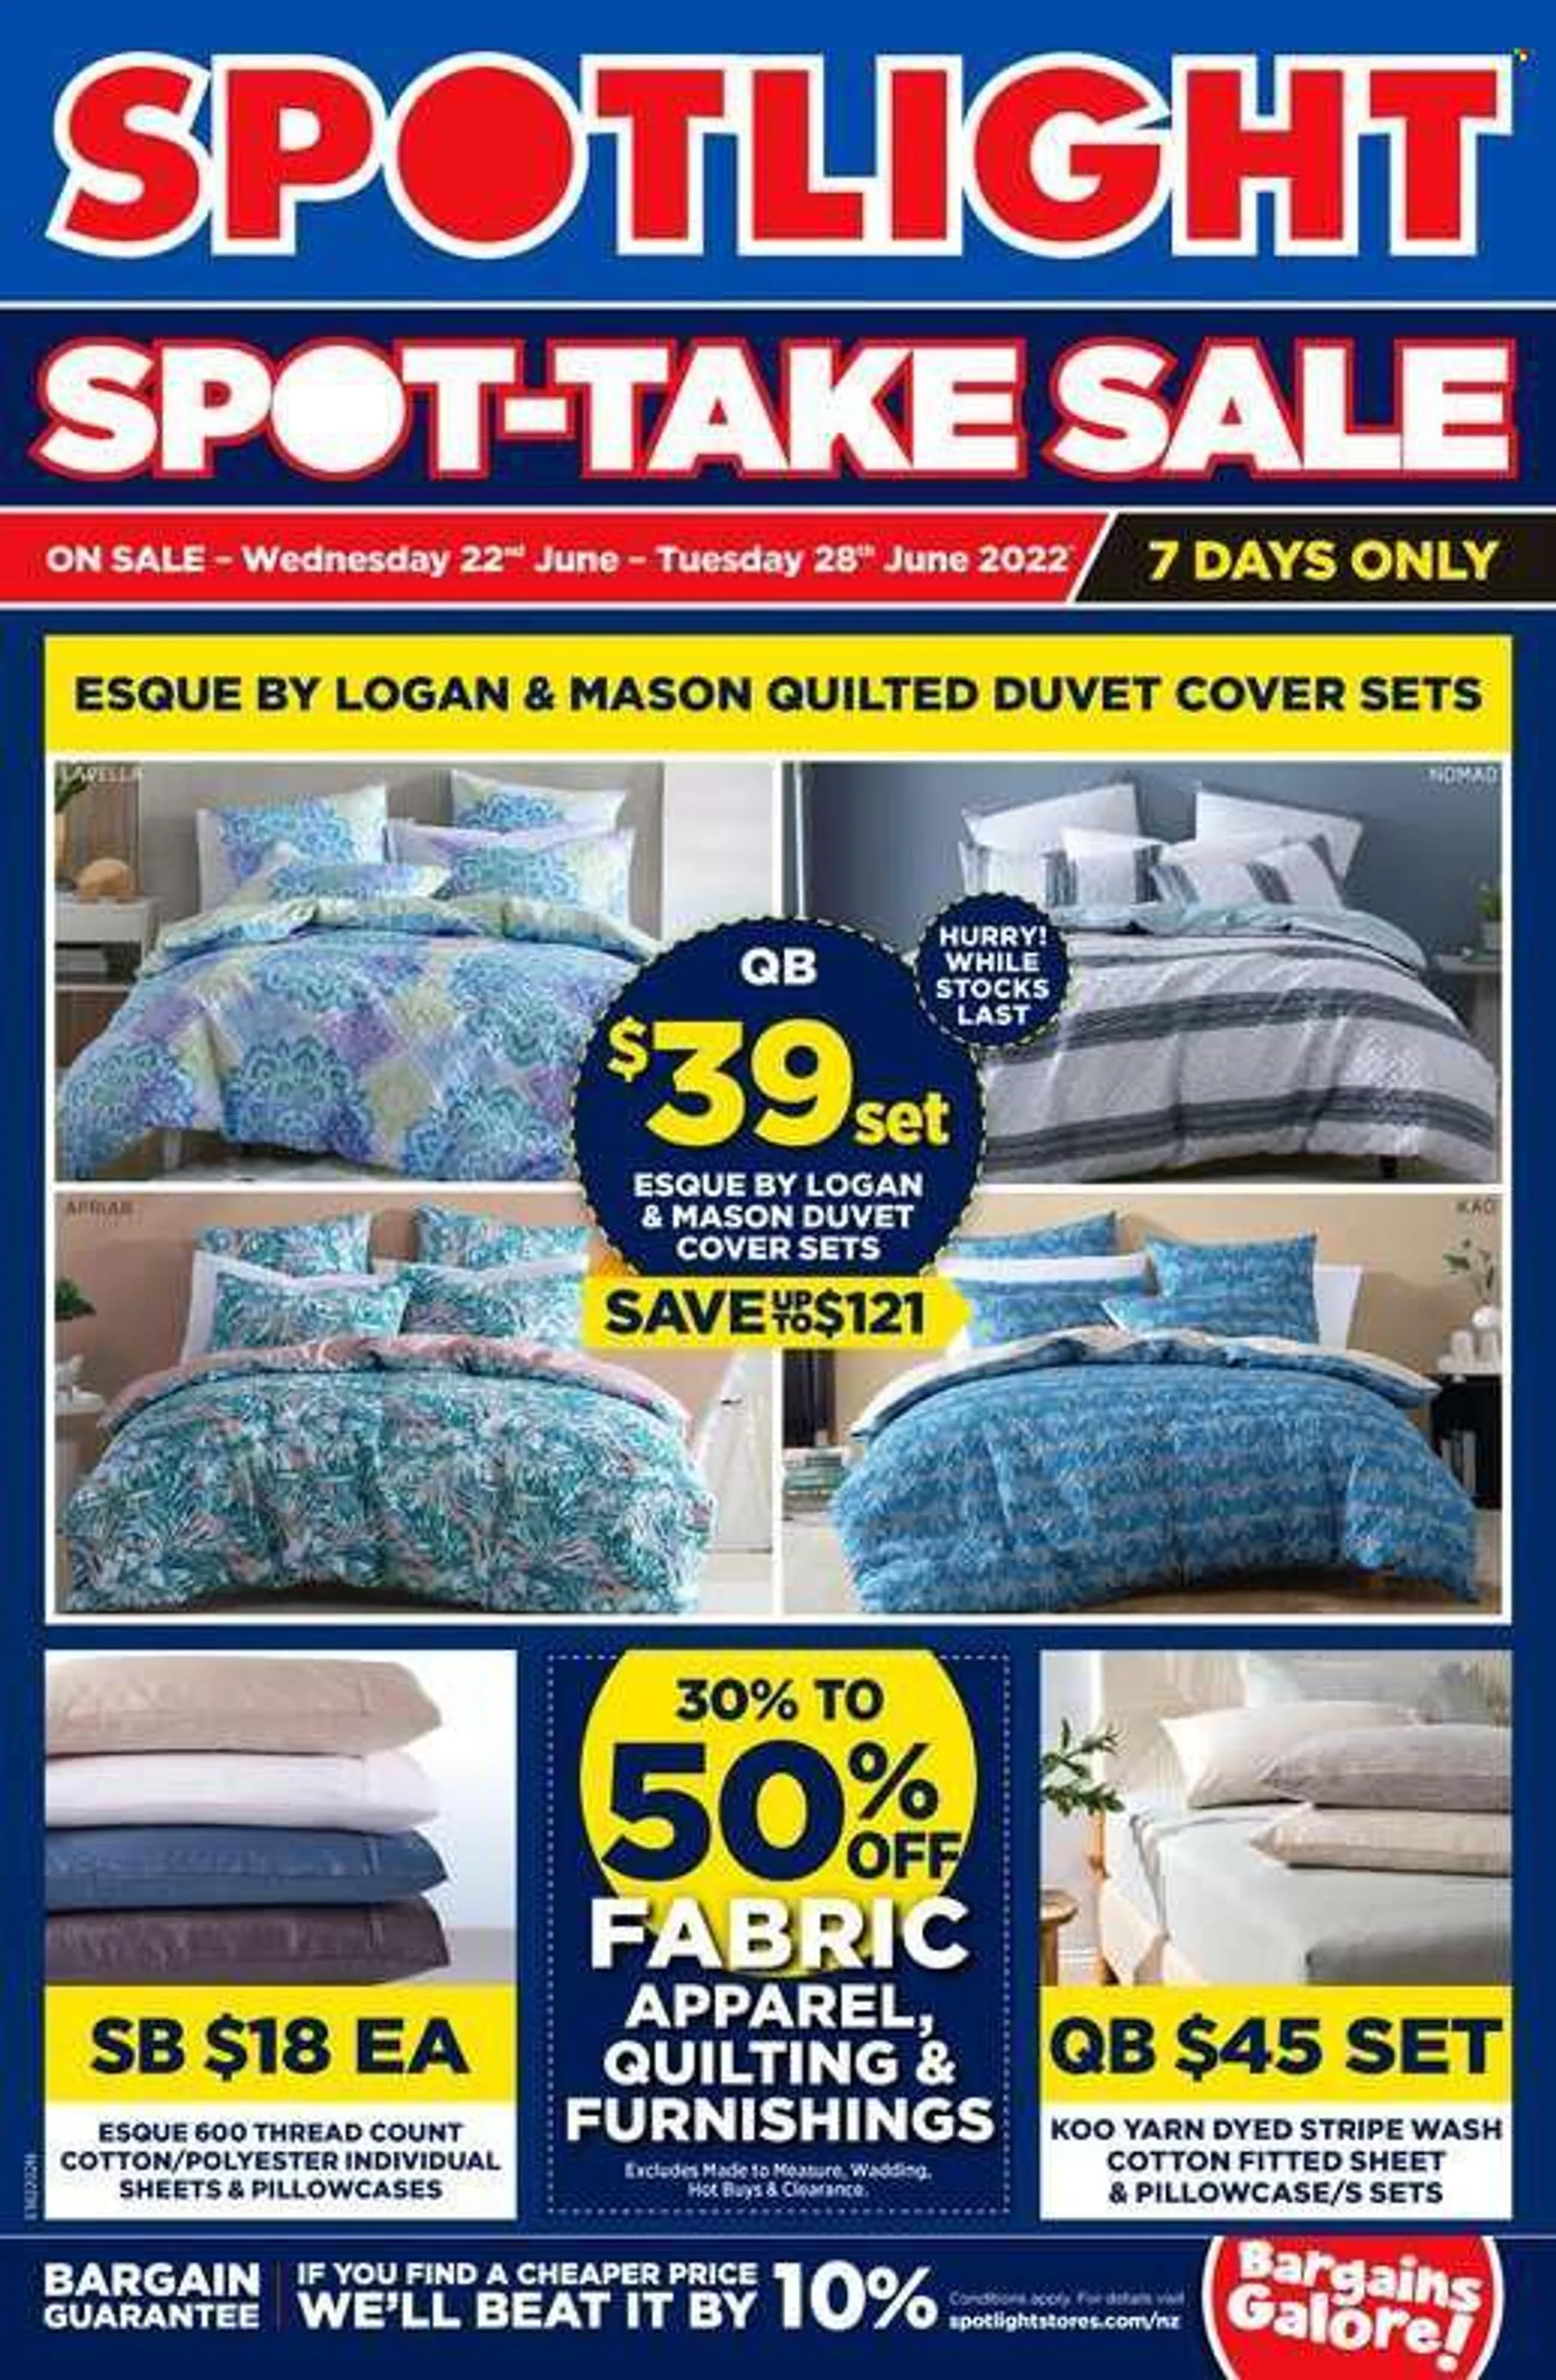 Spotlight mailer - 22.06.2022 - 28.06.2022 - Sales products - knitting wool, duvet, pillowcases. Page 1.